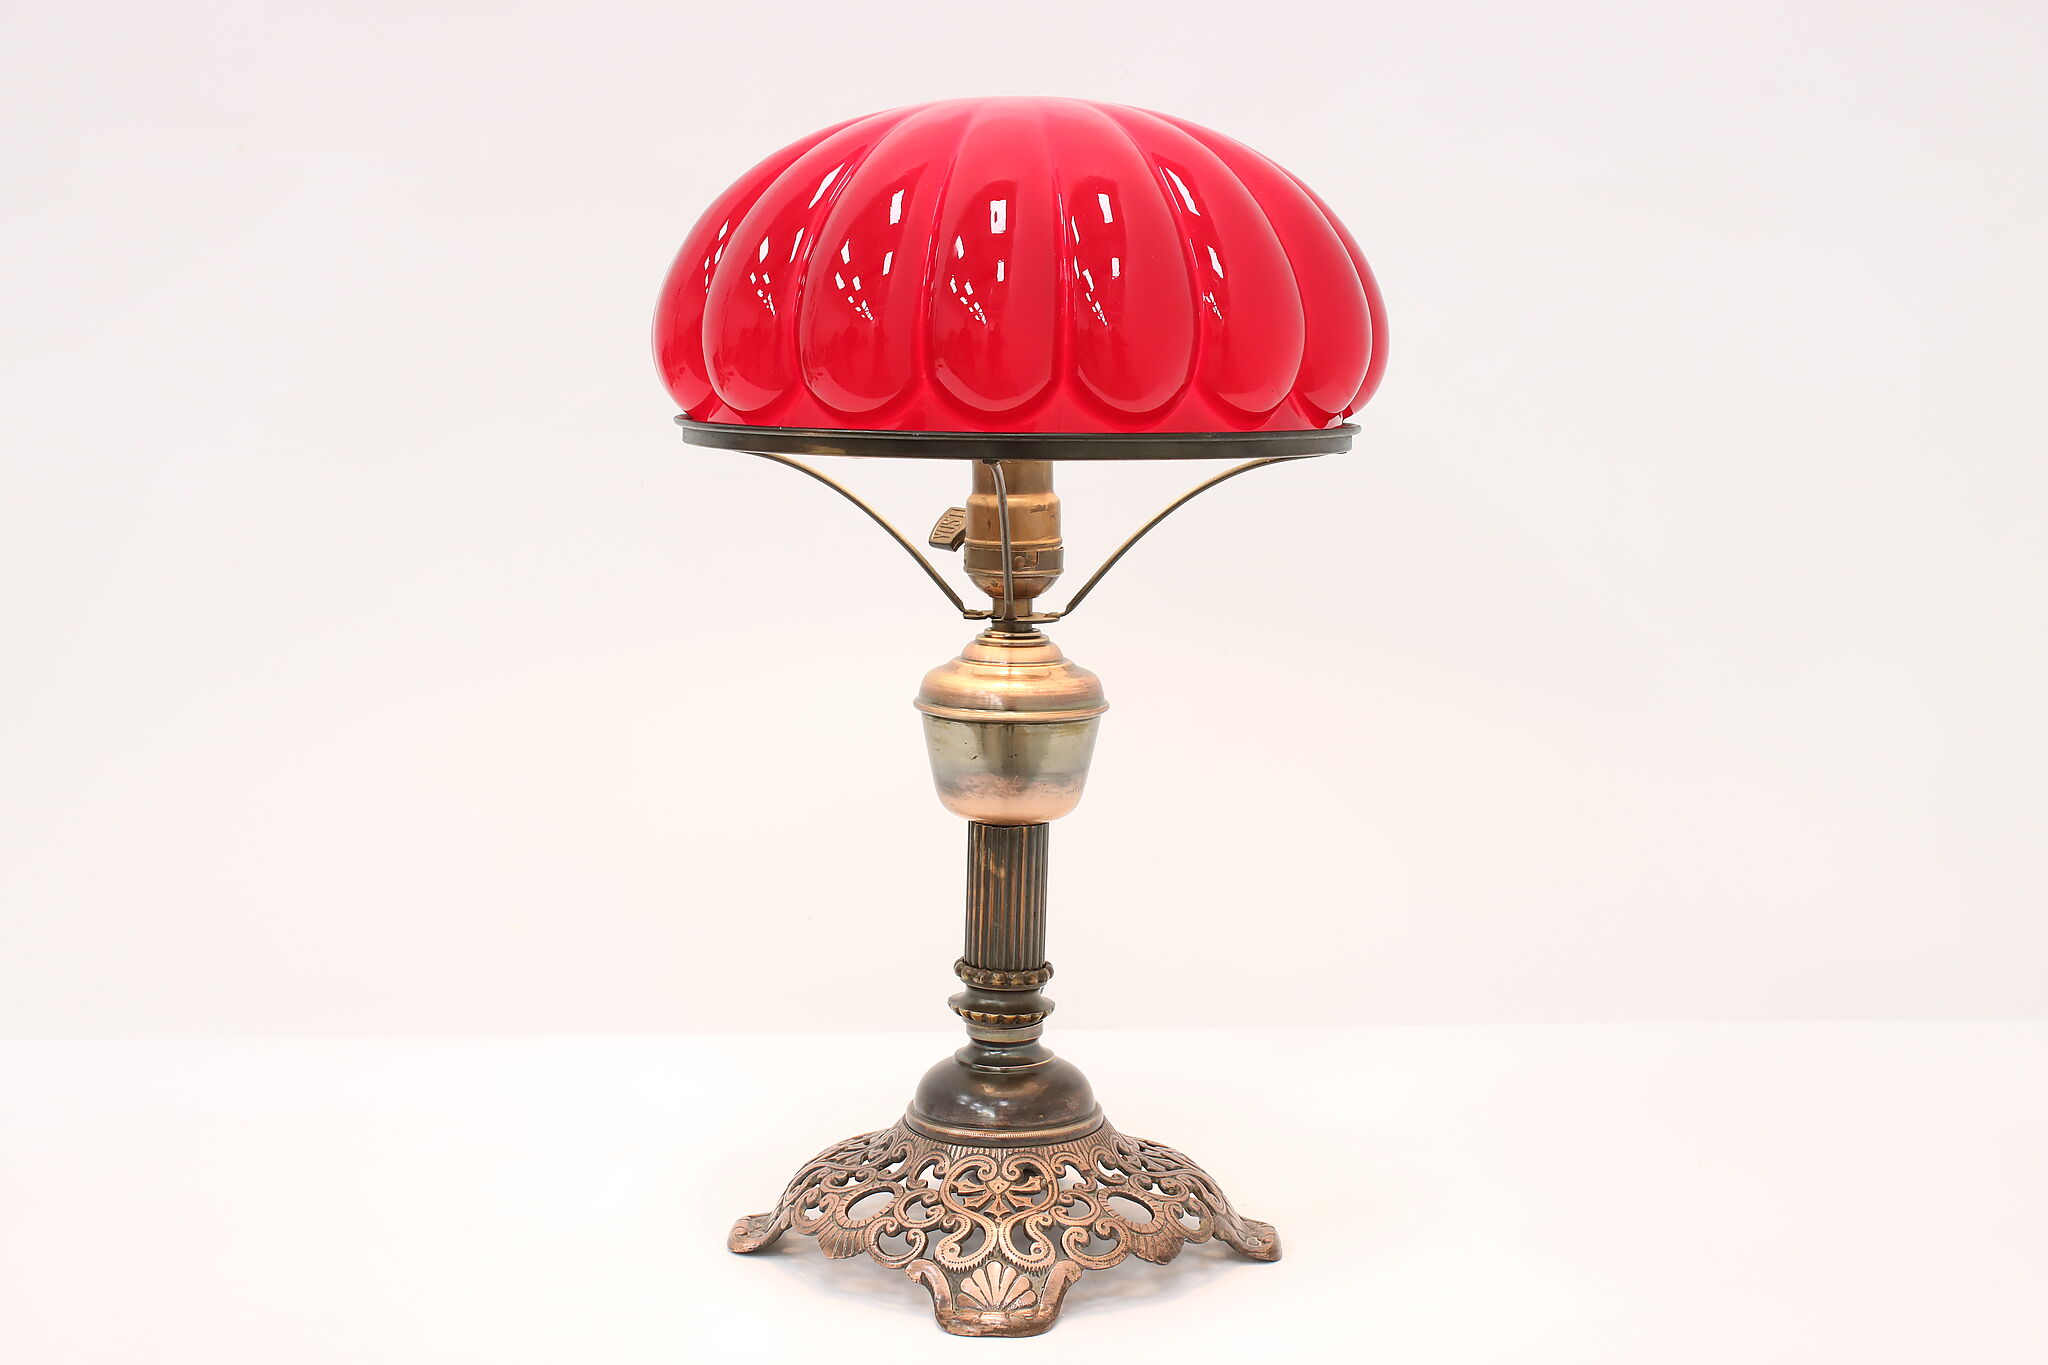 Art Deco Red Glass Melon Shade Antique Office Desk Lamp, F.G. Co